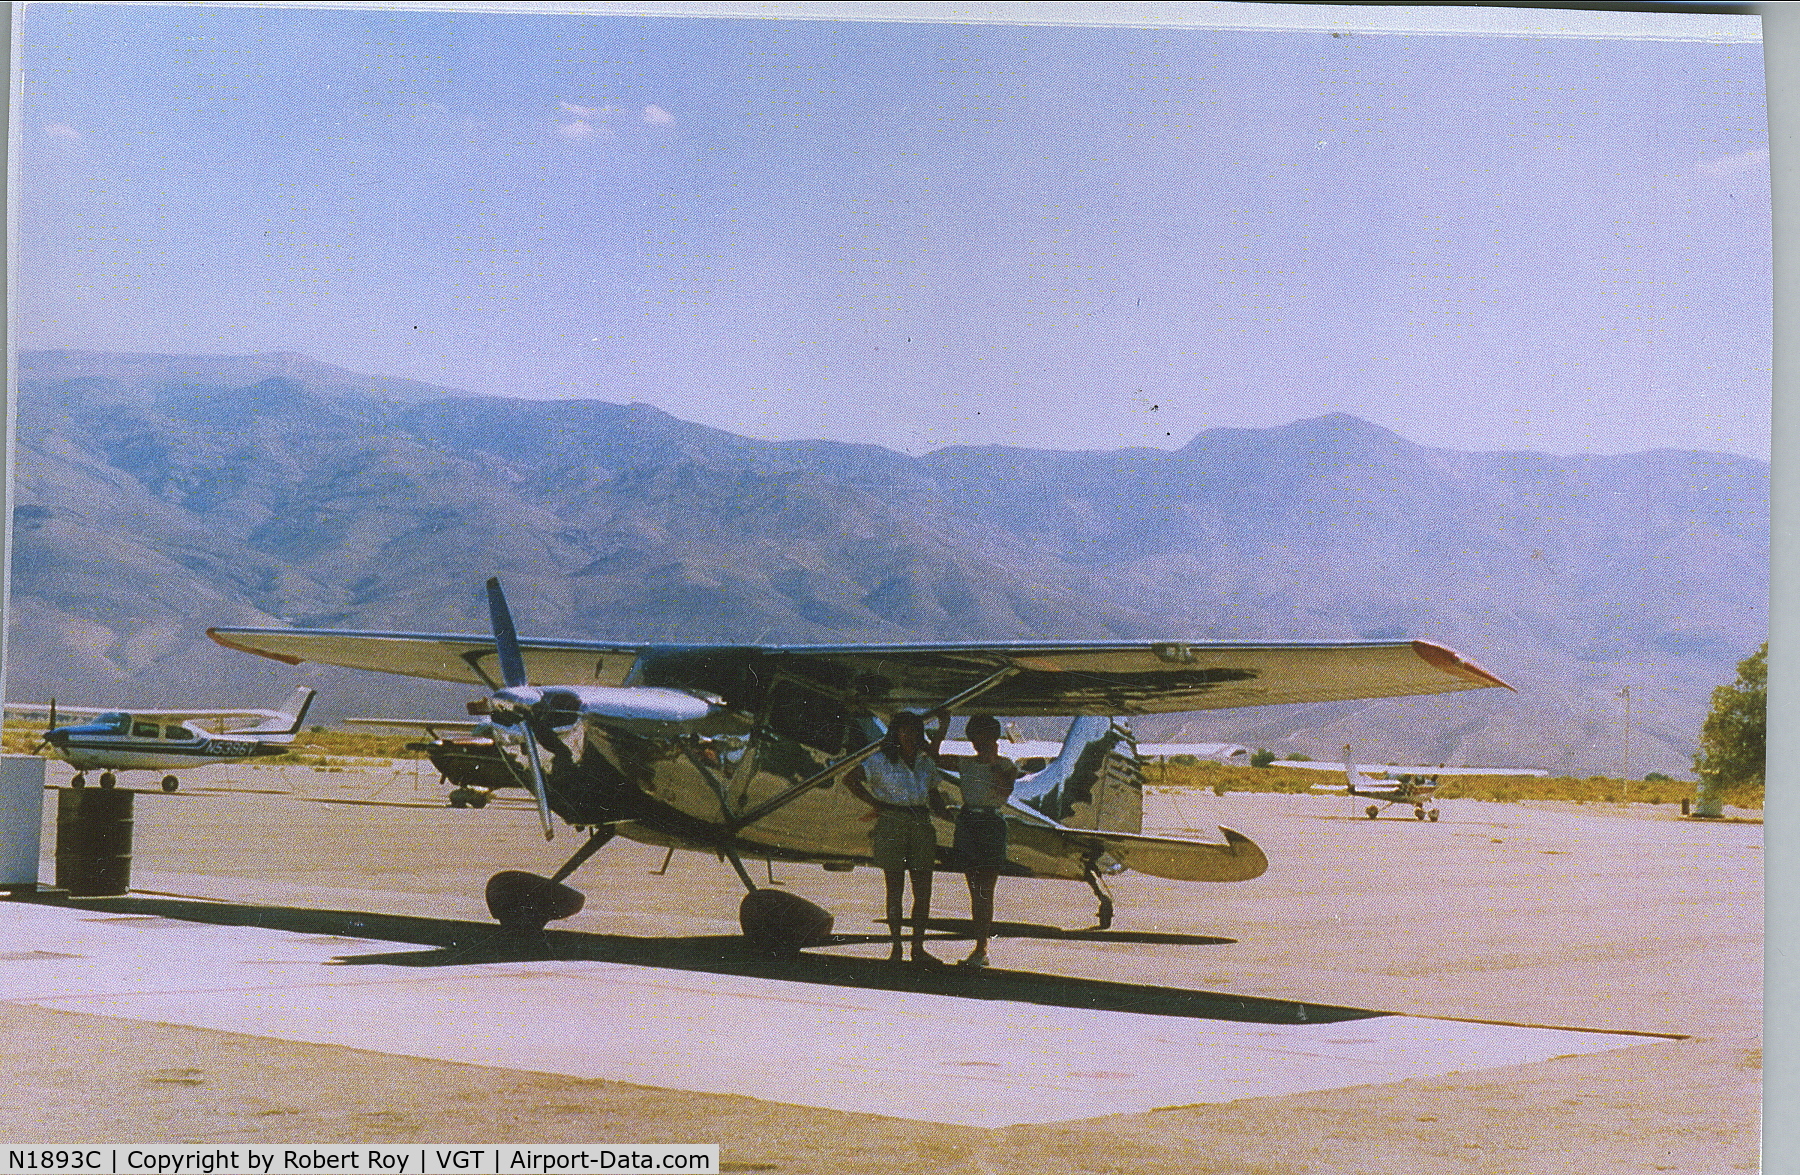 N1893C, 1953 Cessna 170B C/N 26037, On the way to Grand Canyon